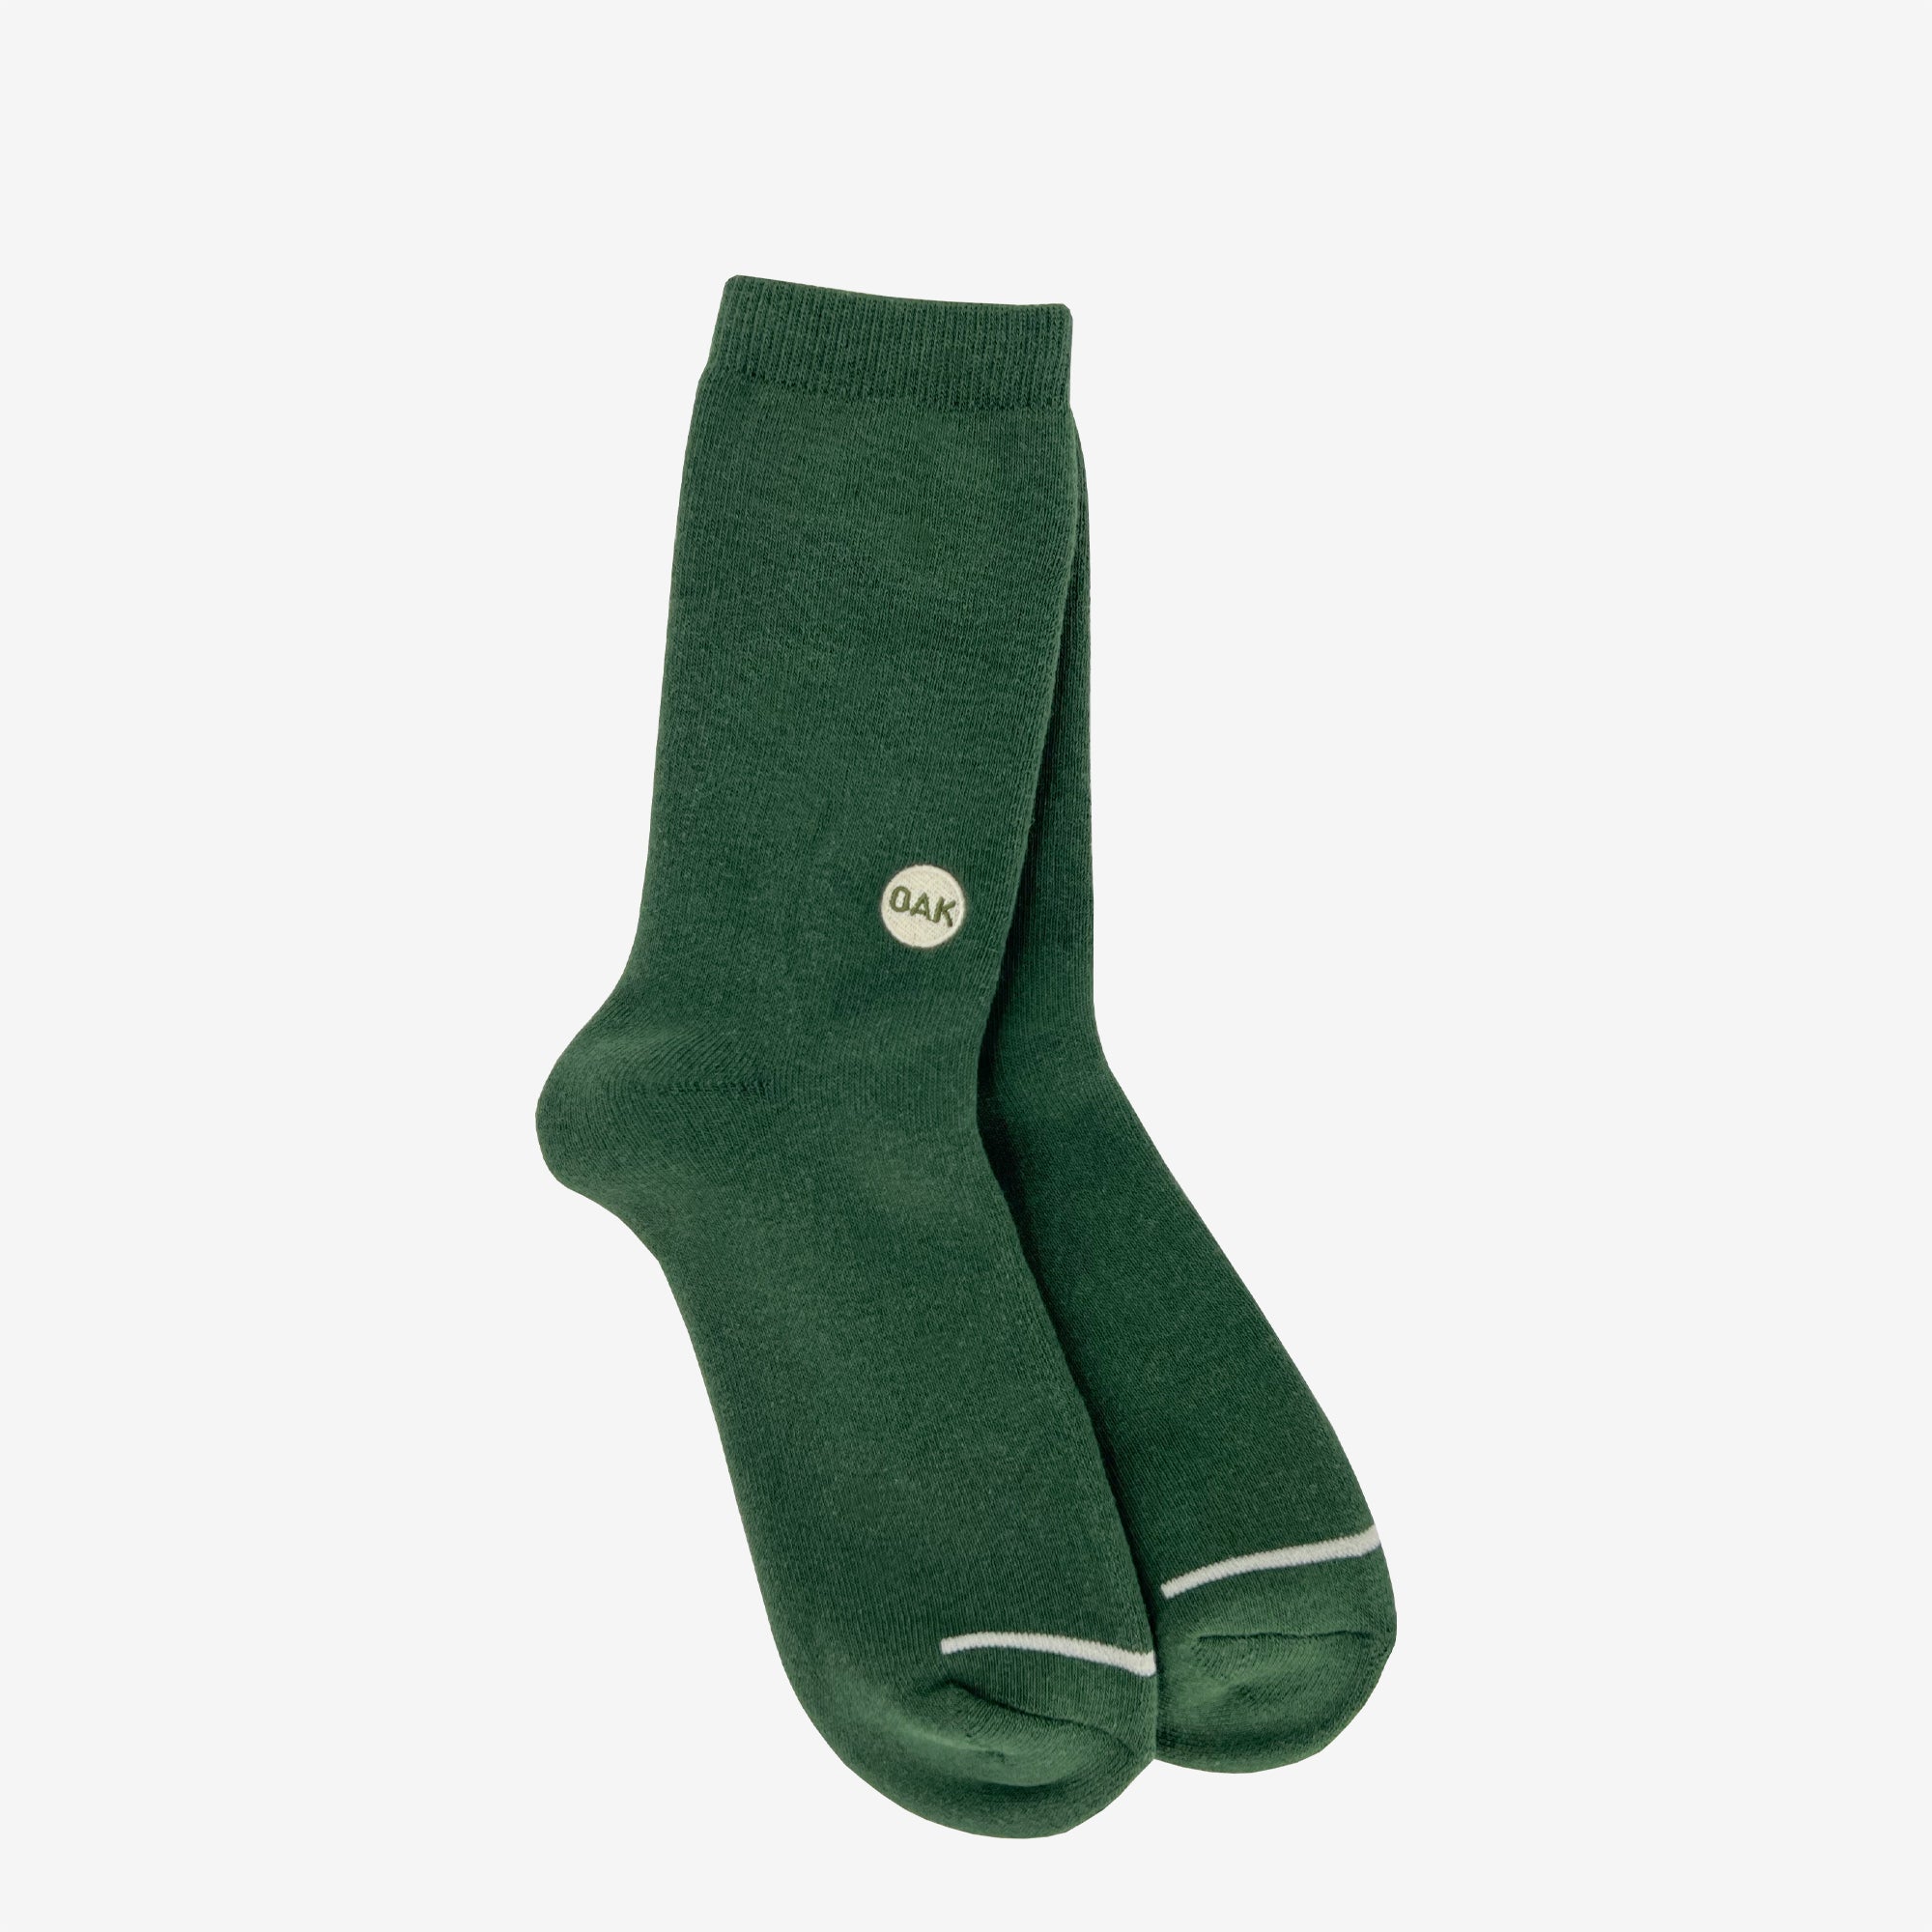 Plush high-cut green crew socks with an embroidered Oak wordmark detail on the ankle on white background.